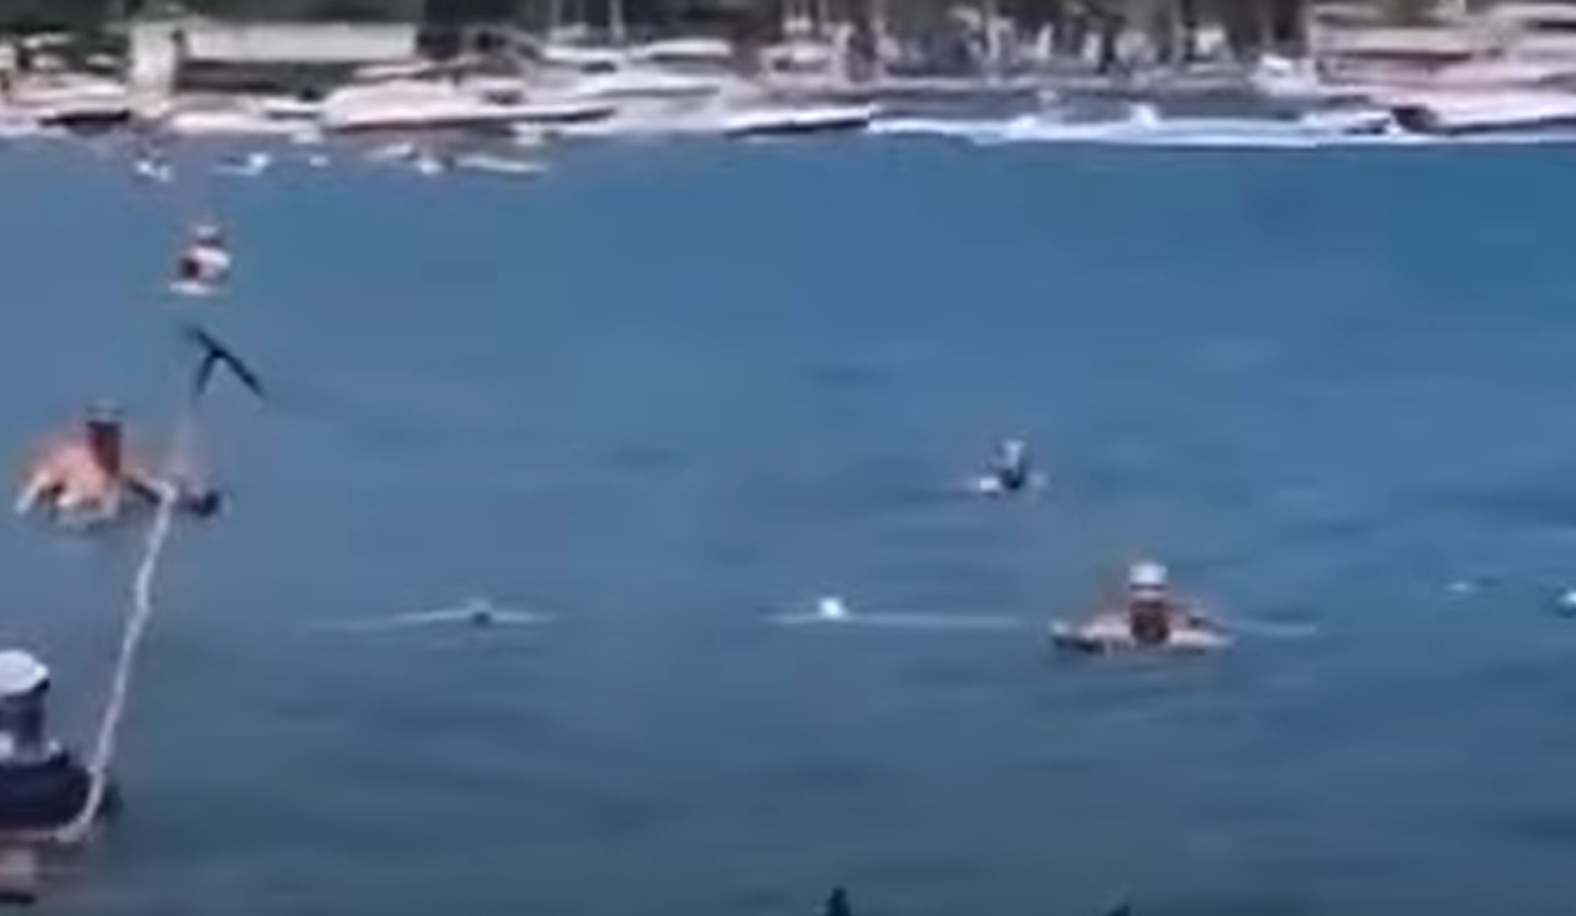 Vacationers in Turkey fought off a shark with a mop (video)